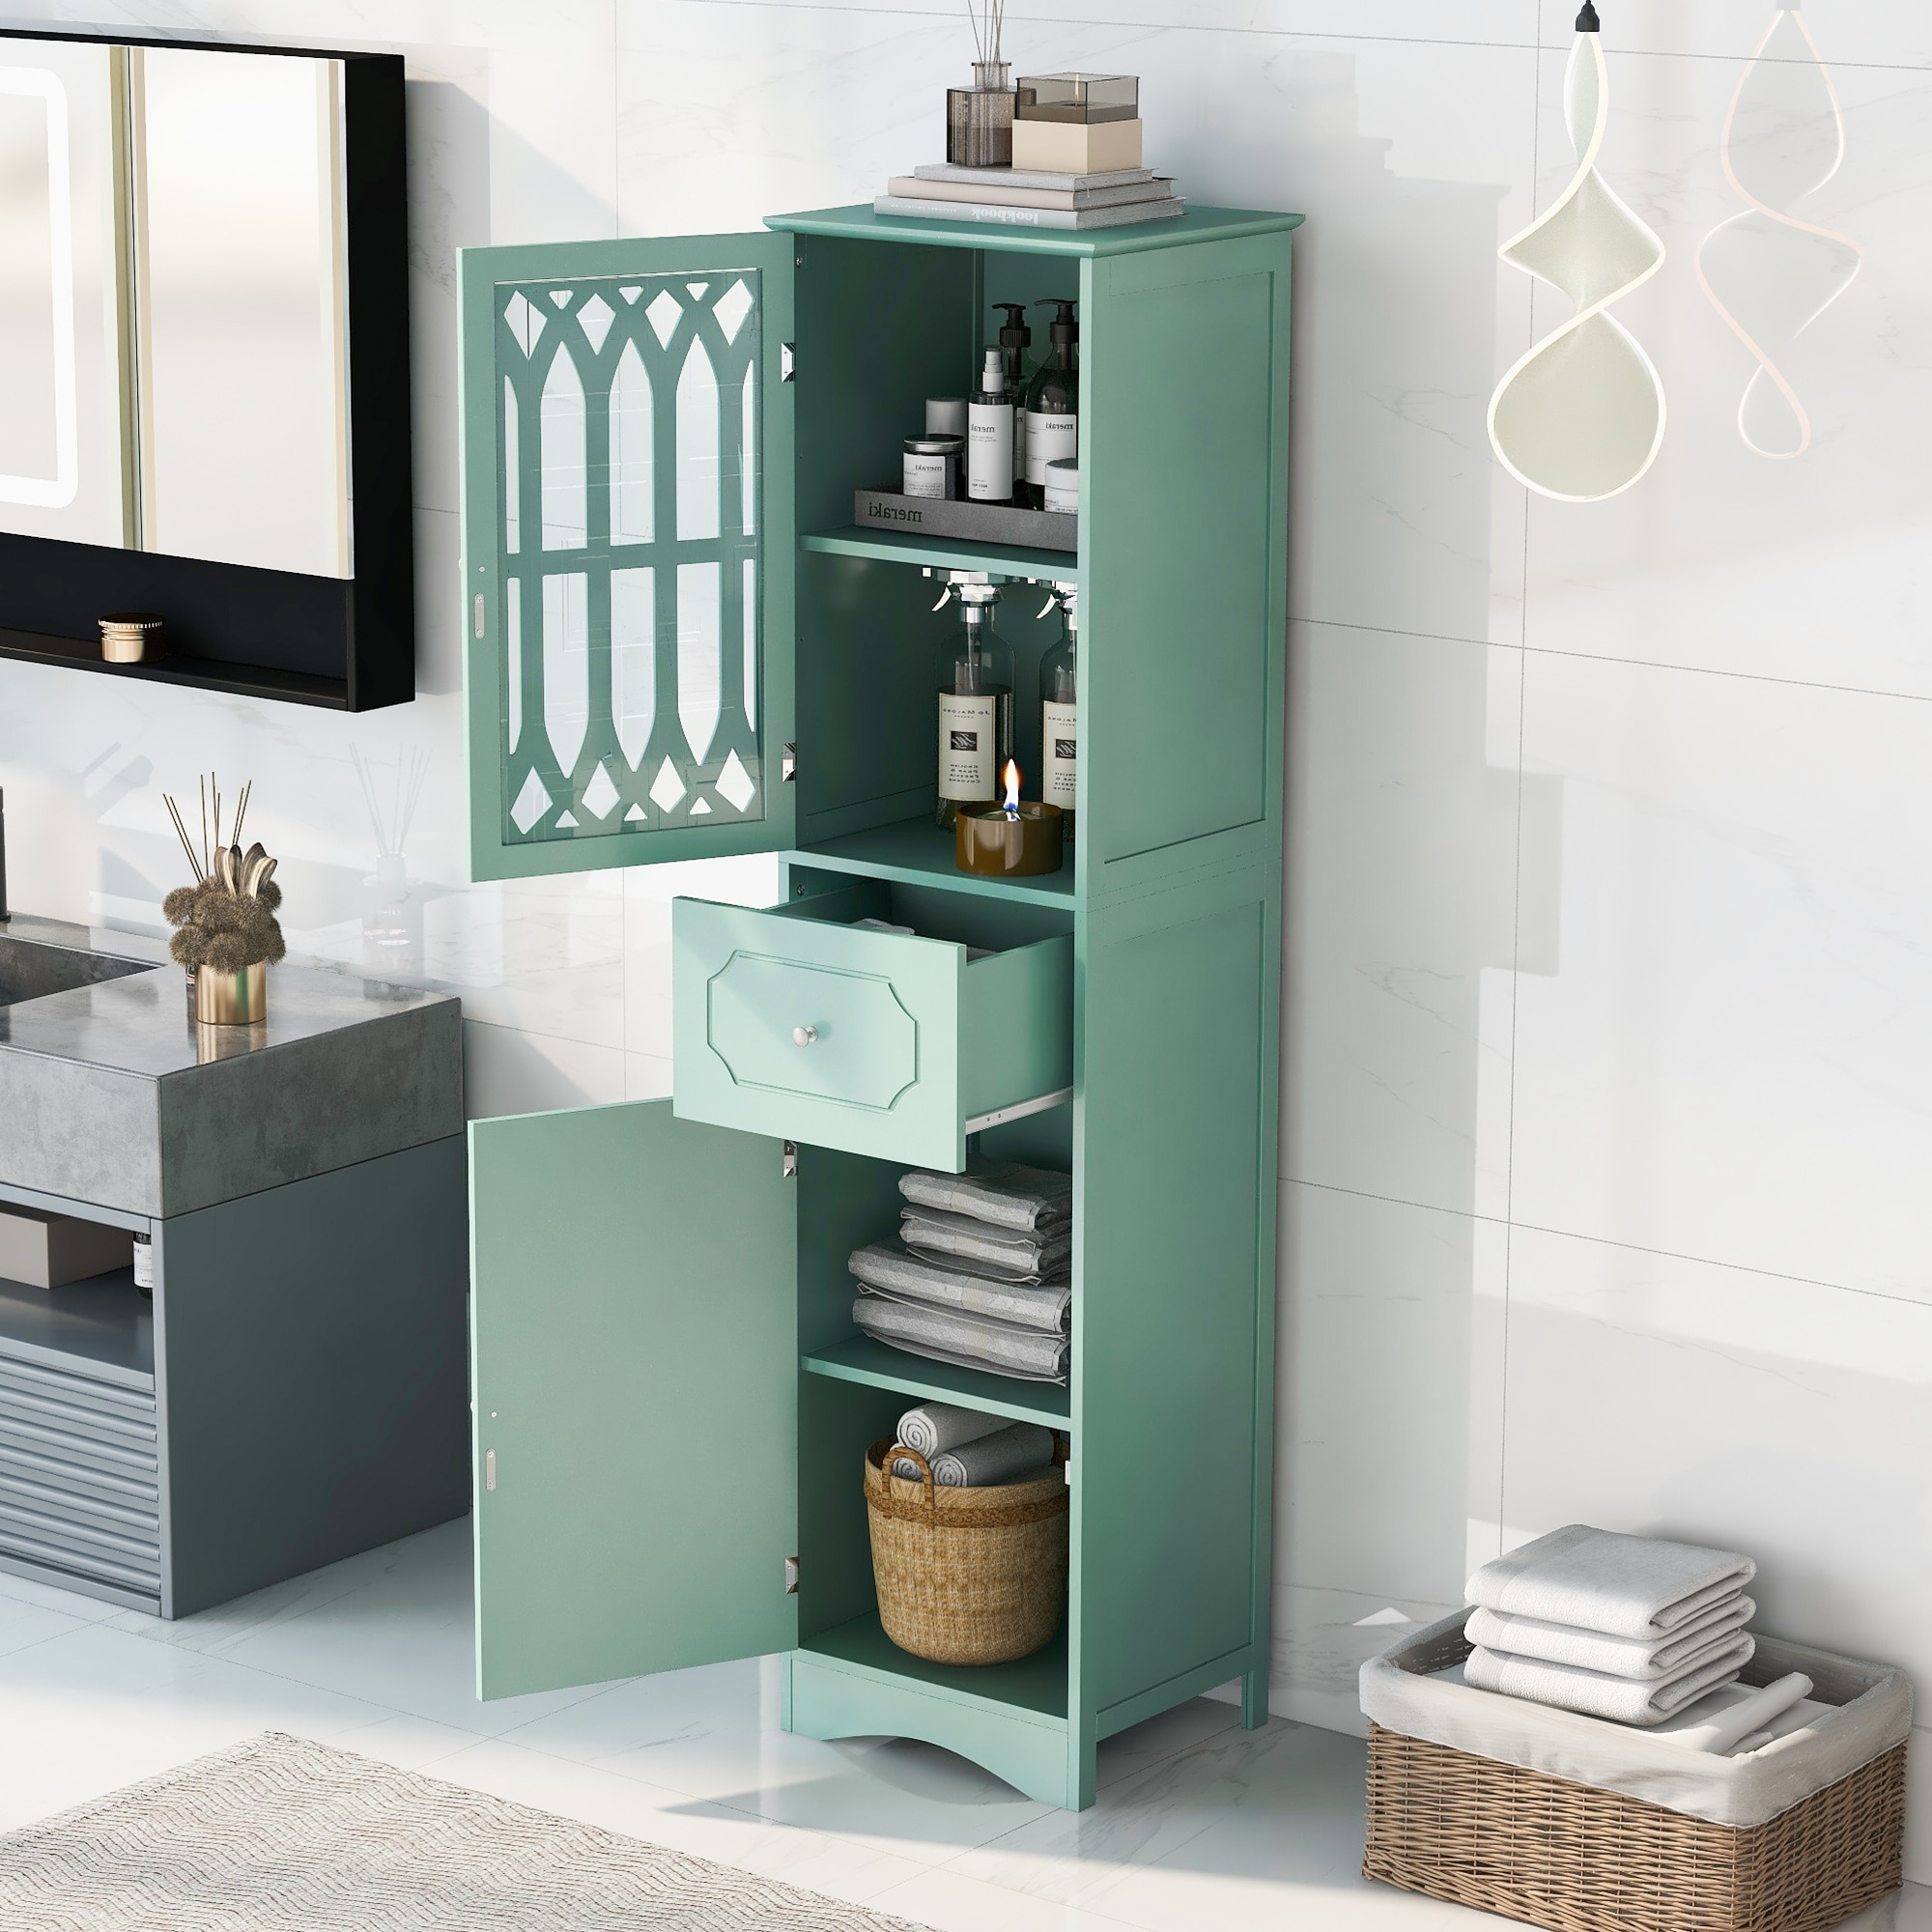 https://ak1.ostkcdn.com/images/products/is/images/direct/269b1aefa50e50e1af2dbcd6f9cf9d389f7507d4/Tall-Bathroom-Cabinet%2C-Freestanding-Storage-Cabinet-with-Drawer-and-2-Doors%2C-Mid-Century-Modern-Cabinet-with-Adjustable-Shelf.jpg